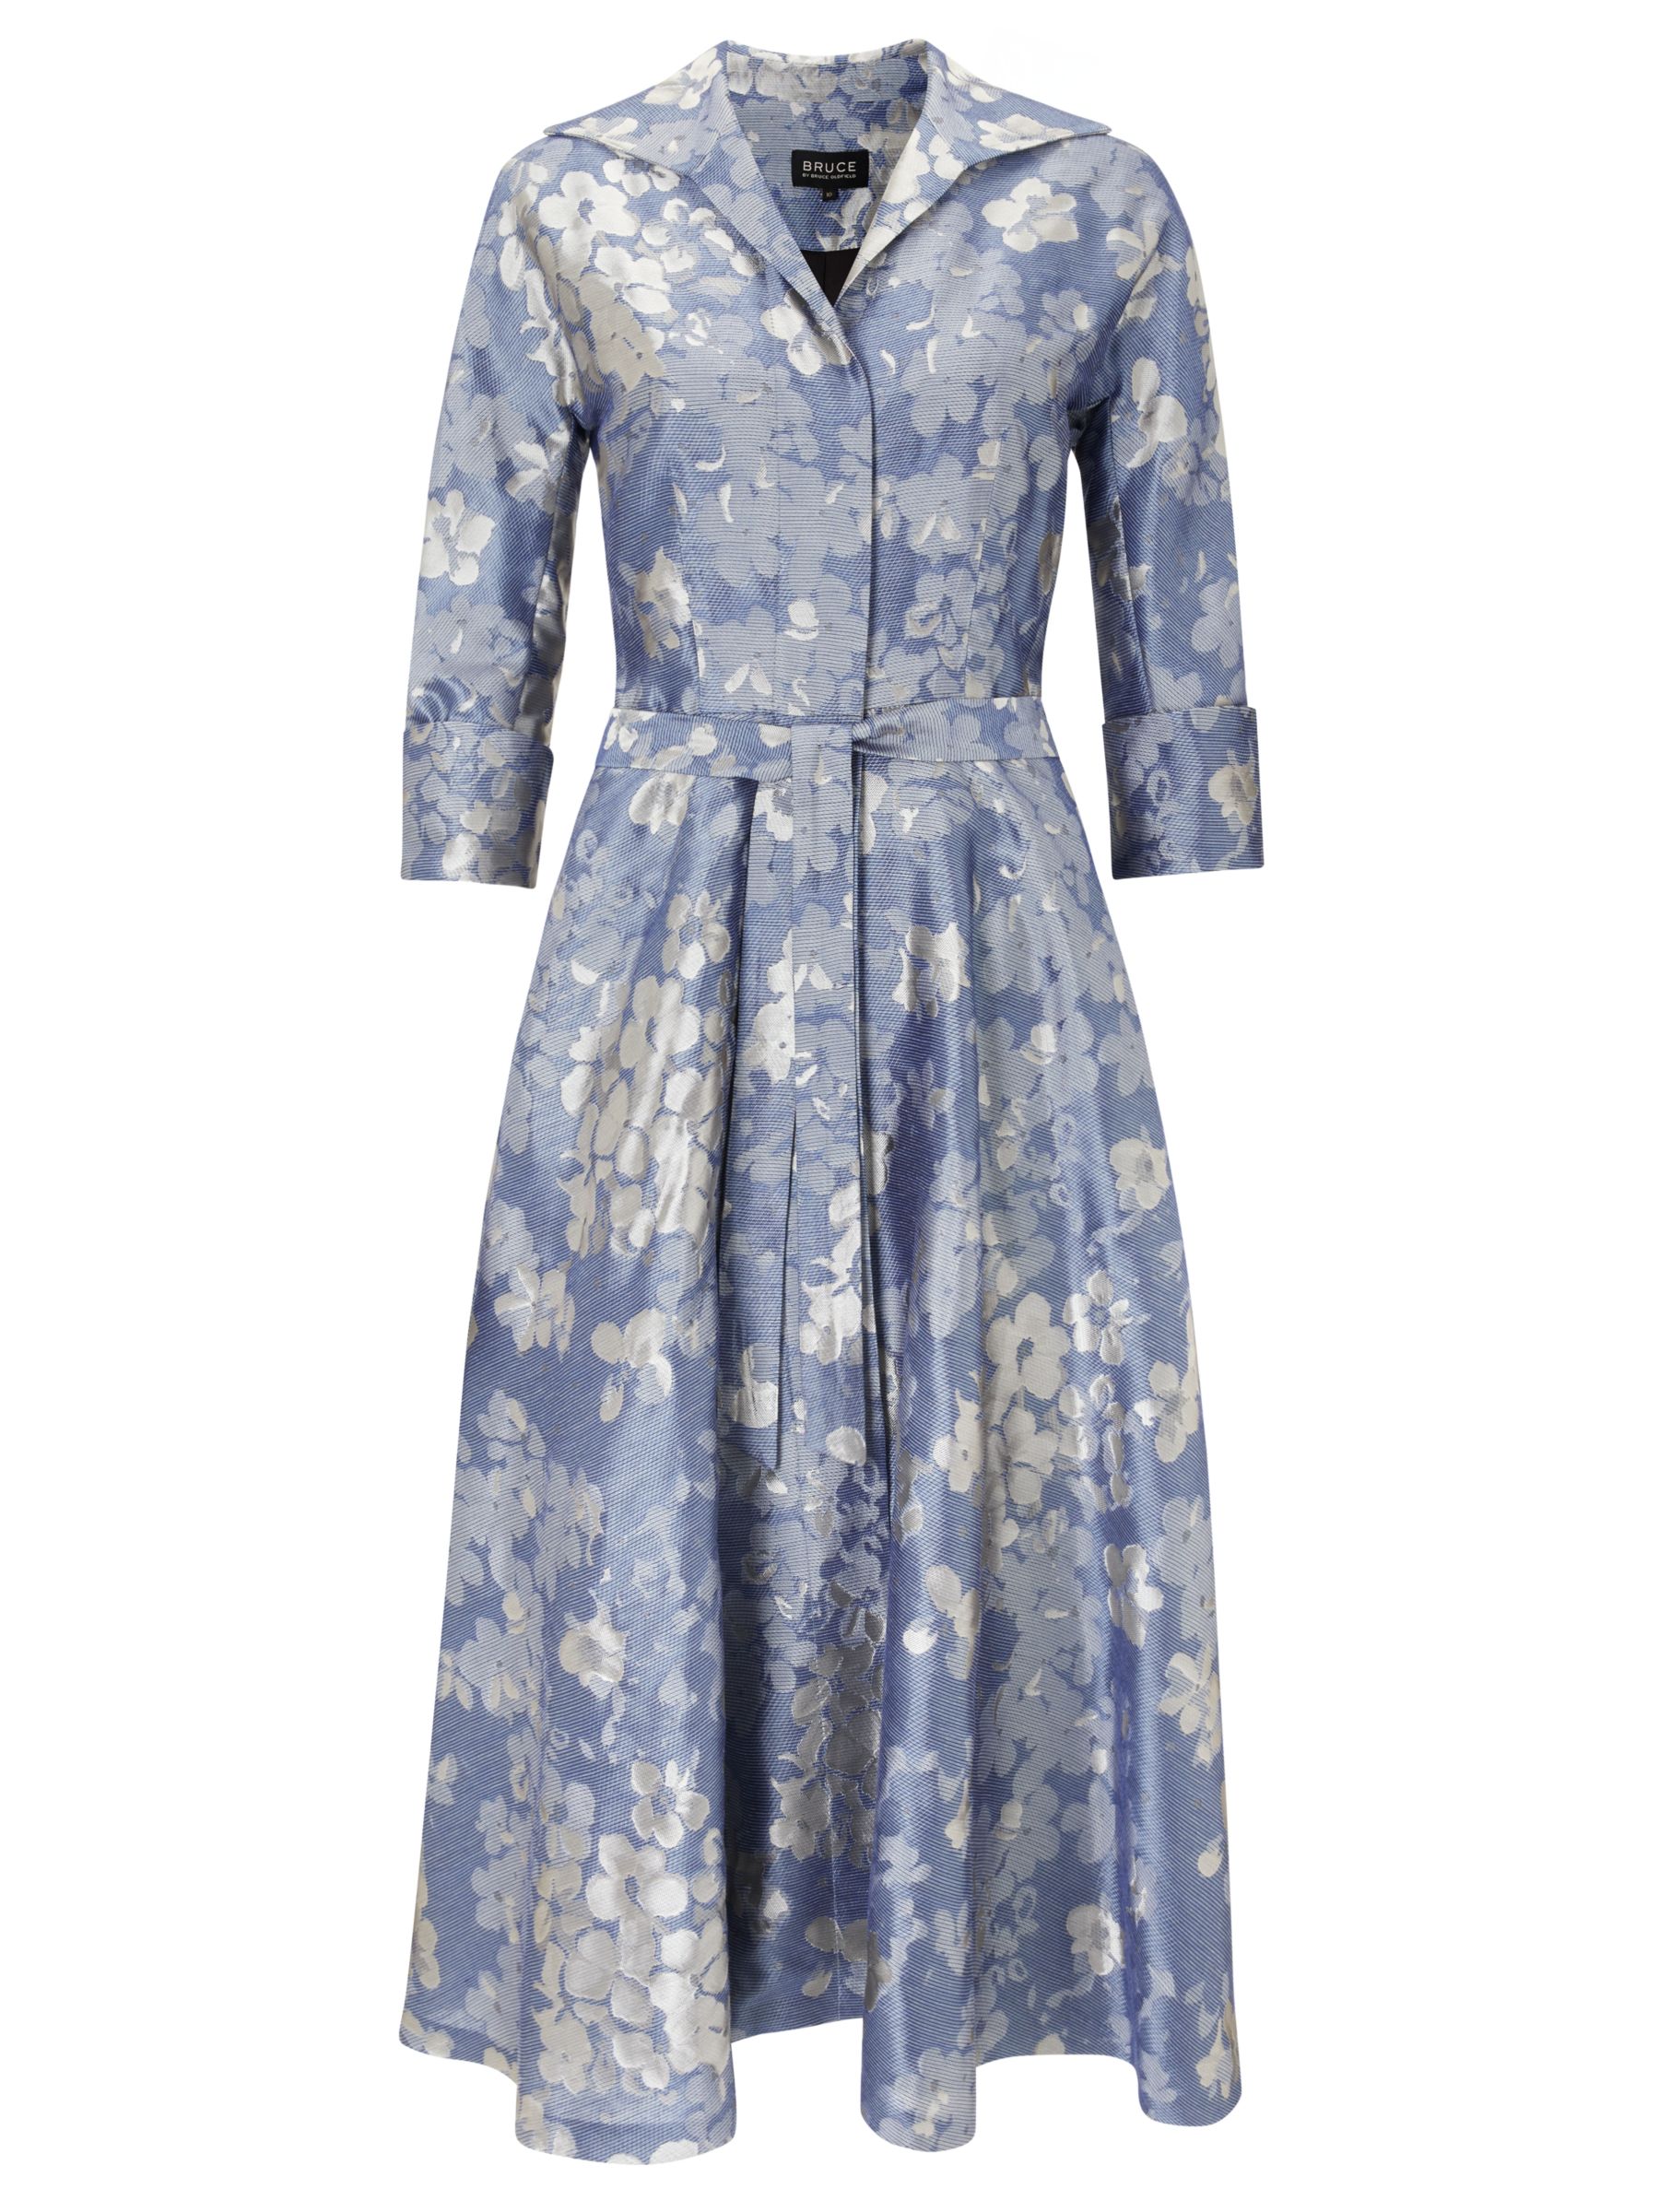 Bruce by Bruce Oldfield Floral Jacquard Dress, Blue